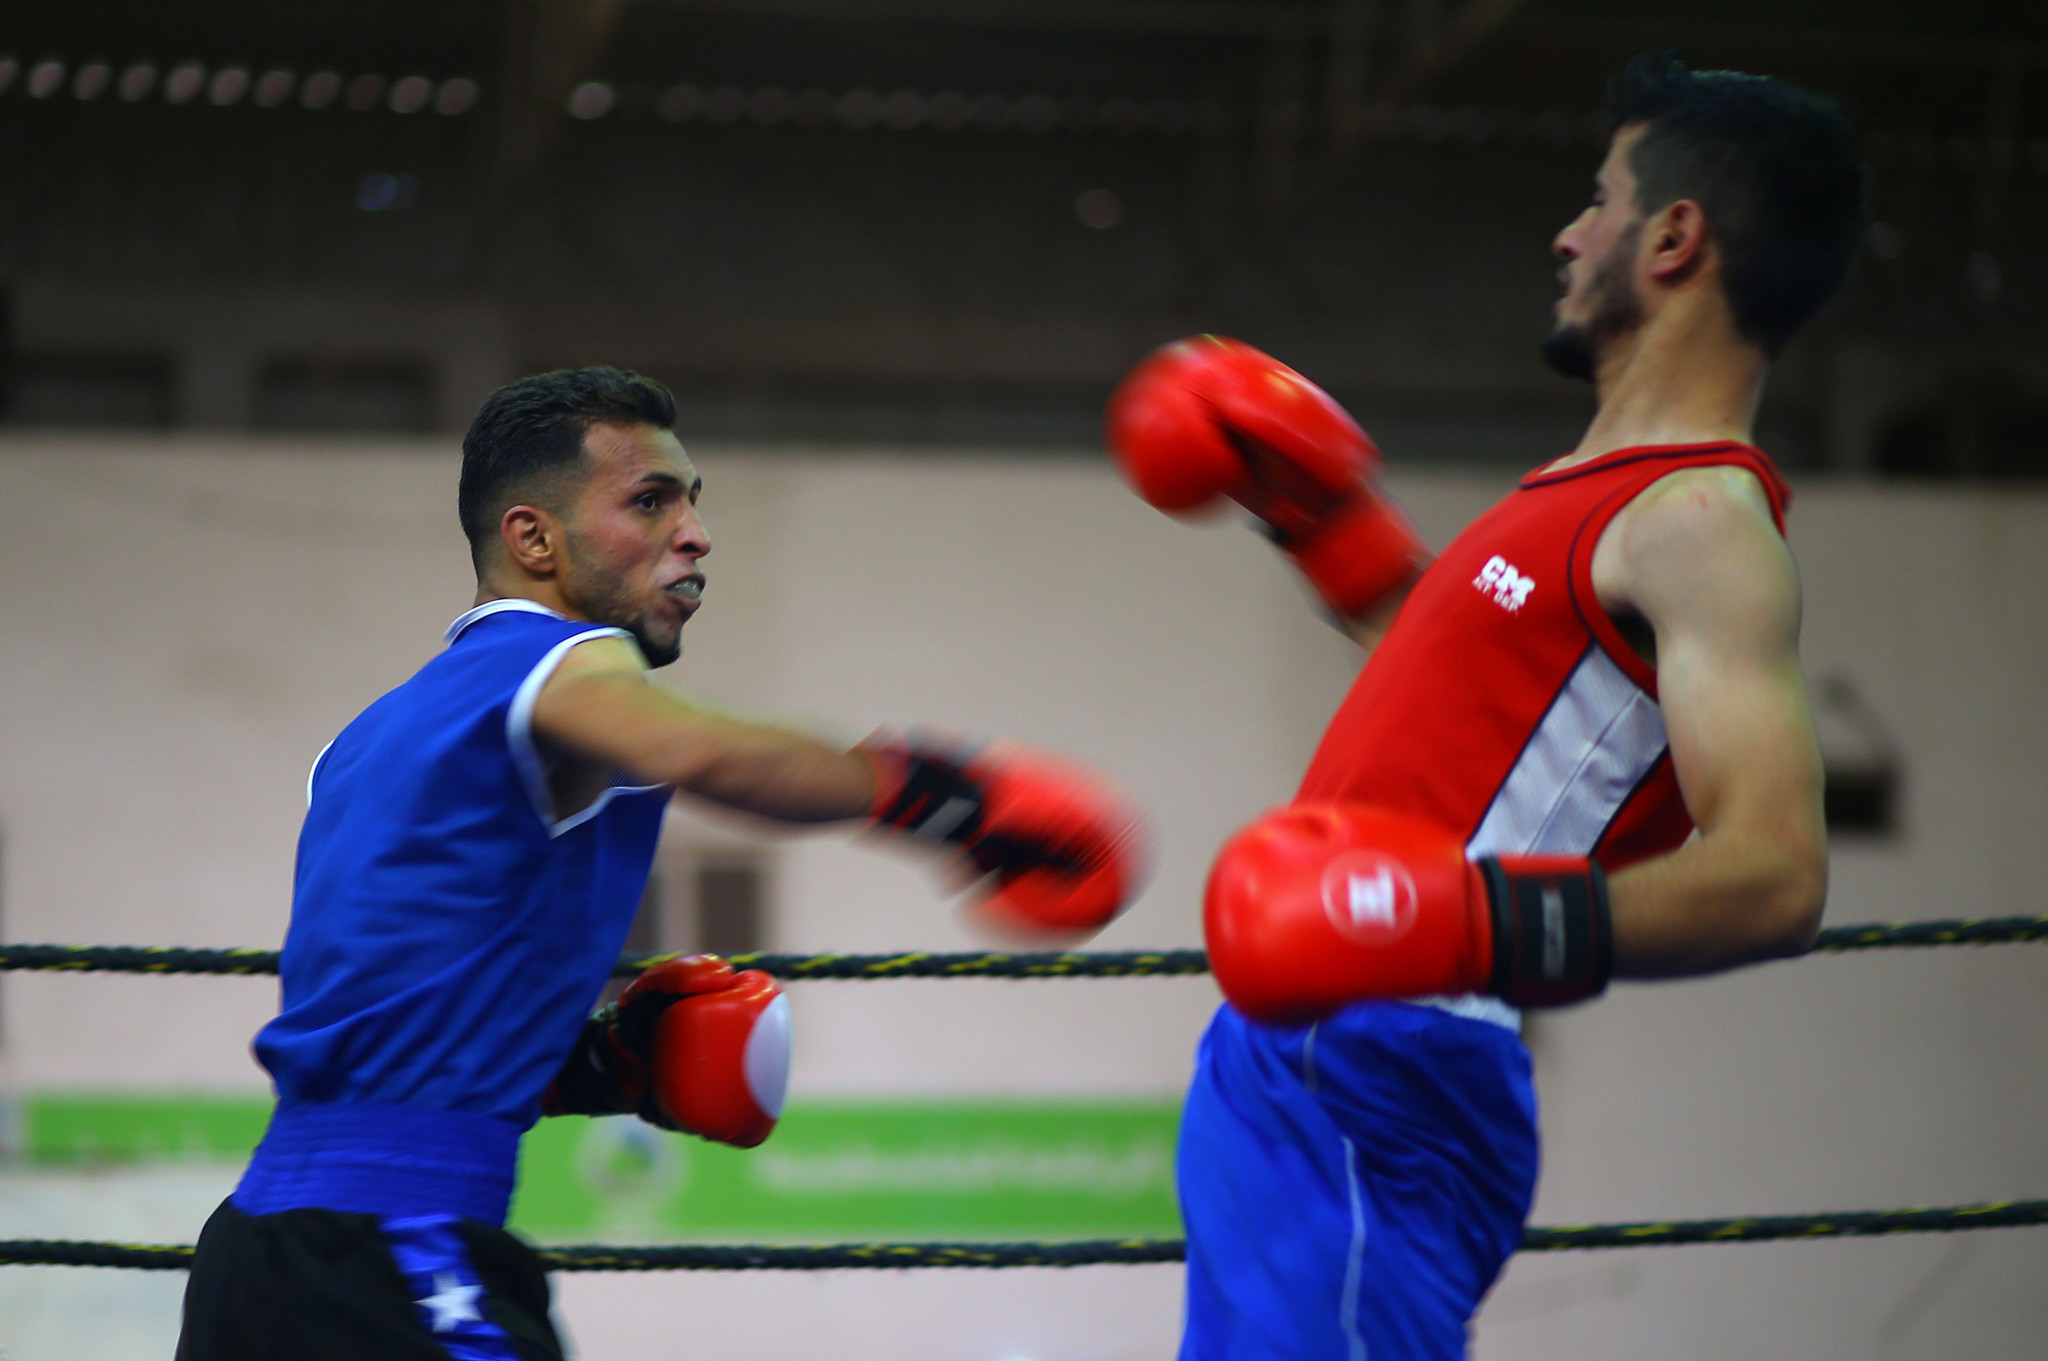 Boxers competing at an event in Gaza ©Getty Images